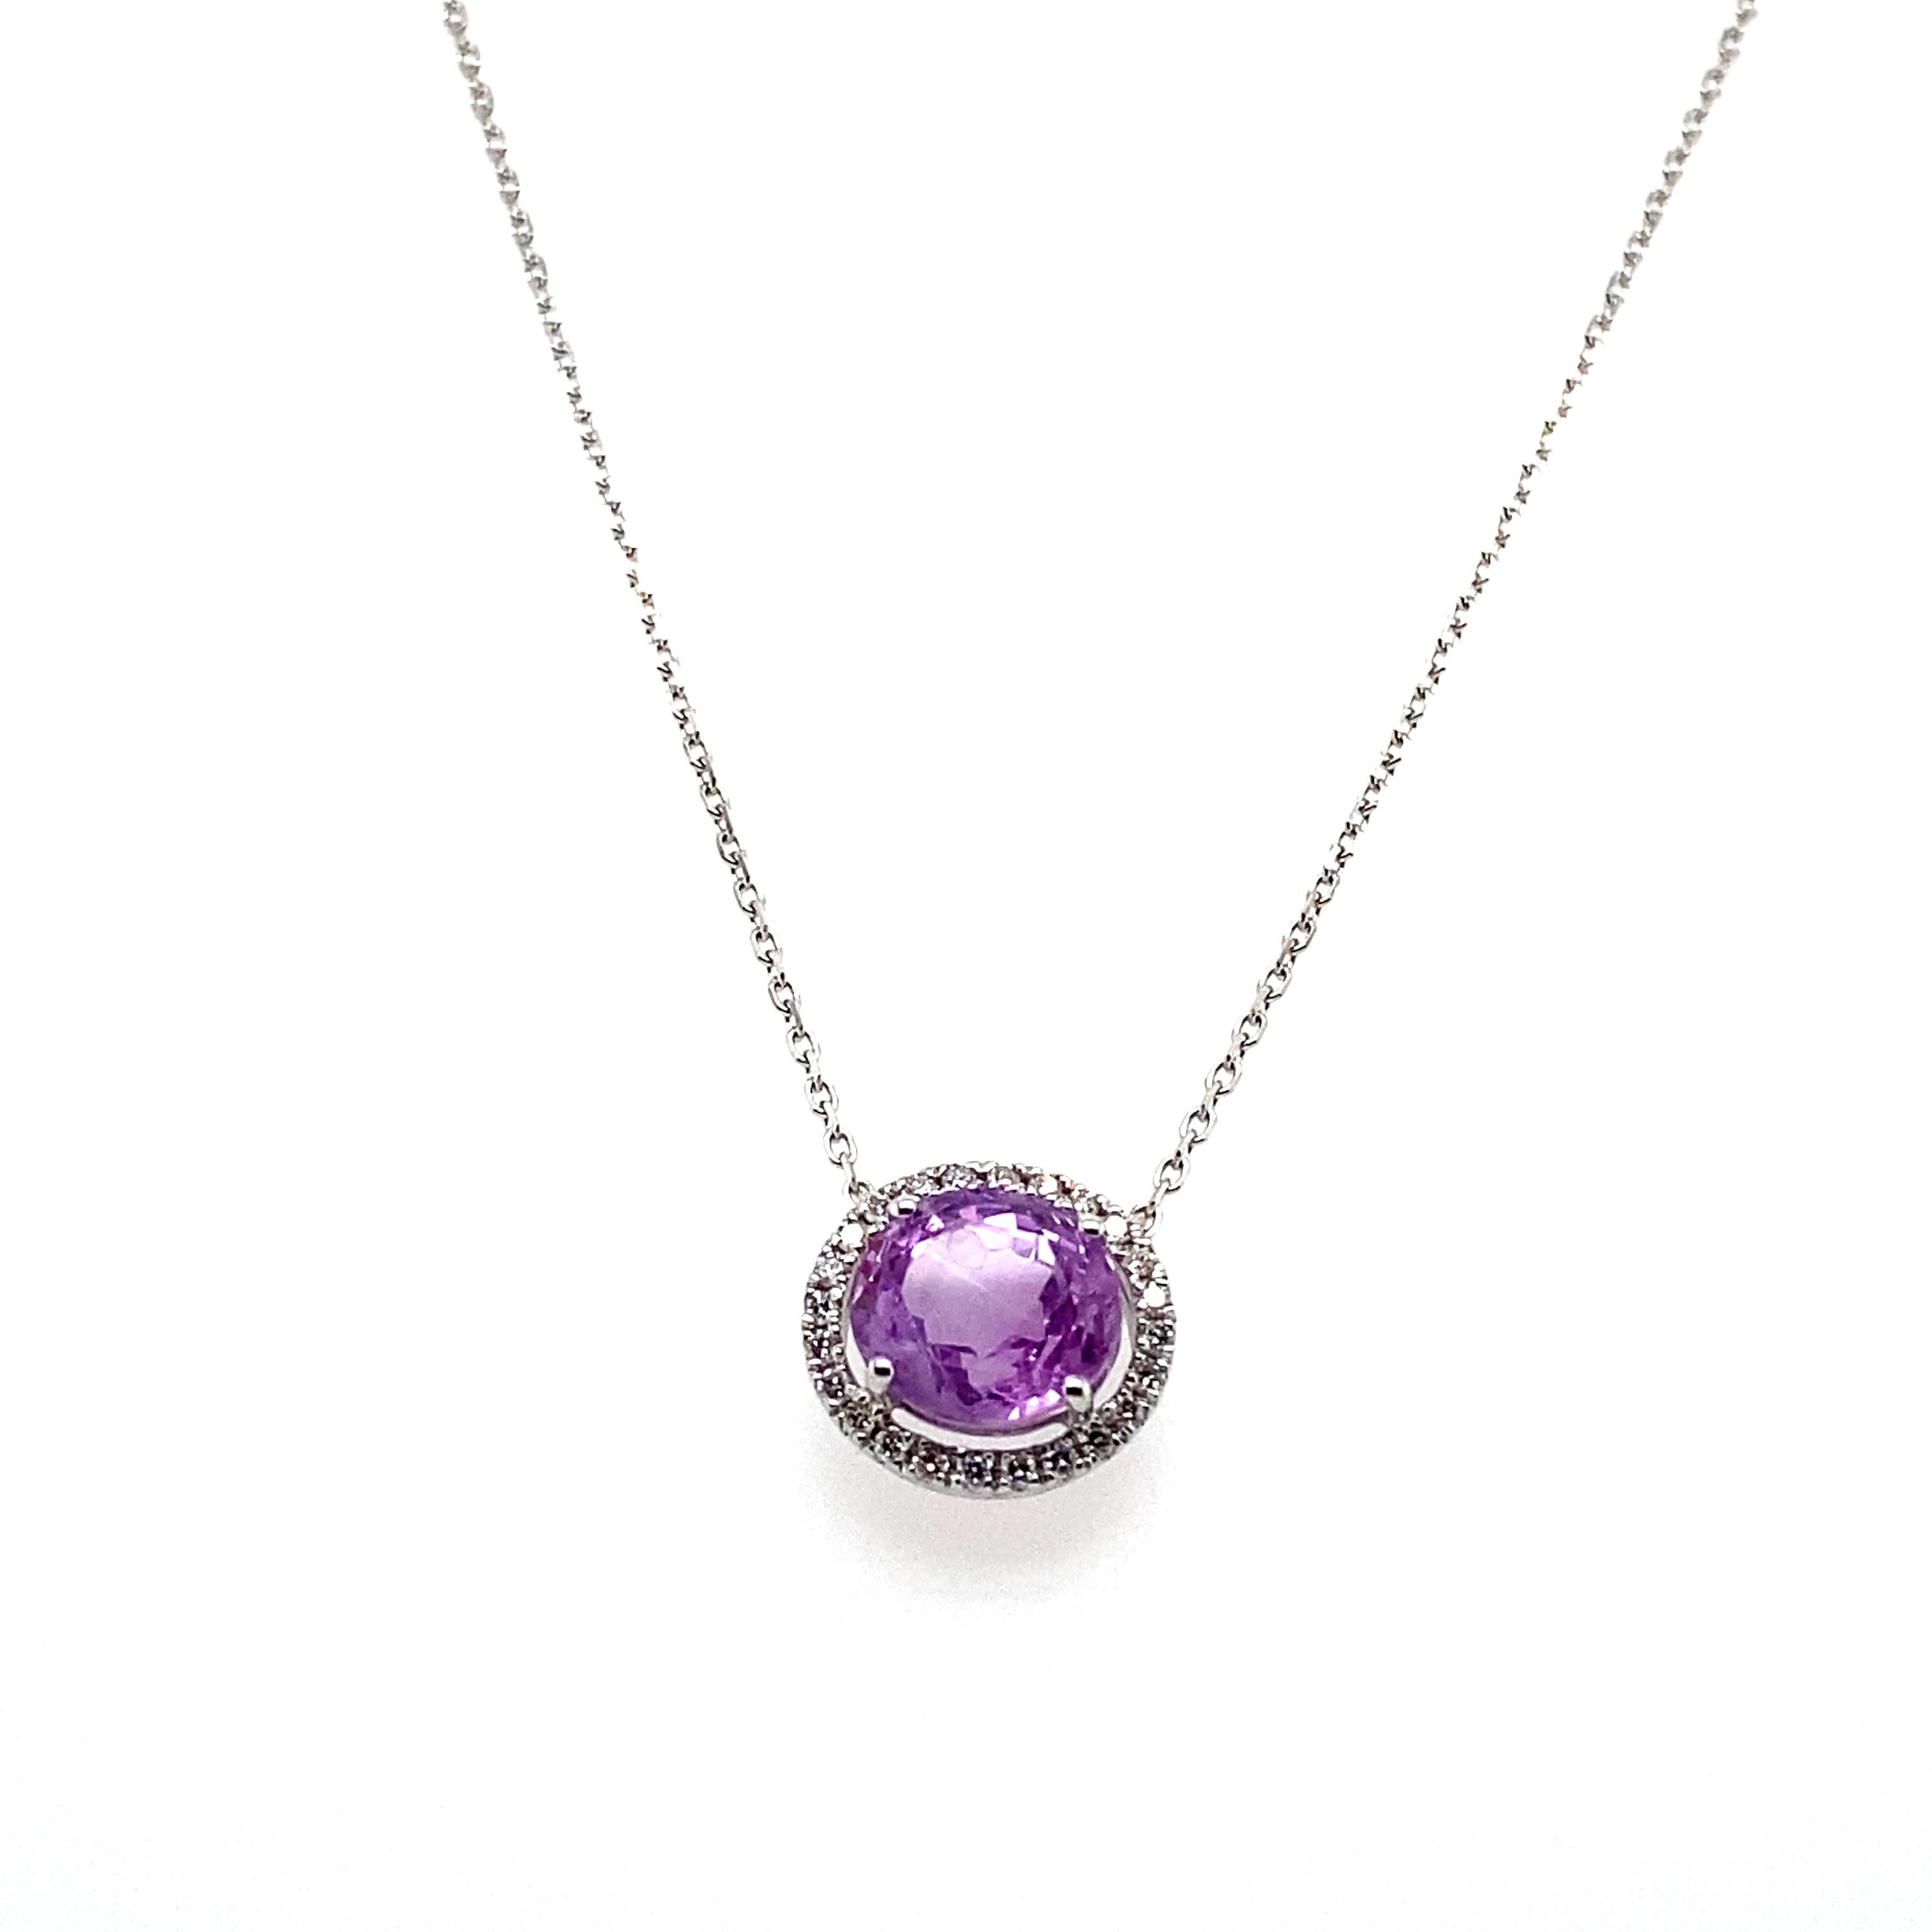 3.07 Carat Oval-Cut No Heat Purple Sapphire and White Diamond Pendant Necklace:

A beautiful pendant necklace, it features a 3.07 carat oval-cut unheated purple sapphire in the centre surrounded by a halo of white round-brilliant cut diamonds